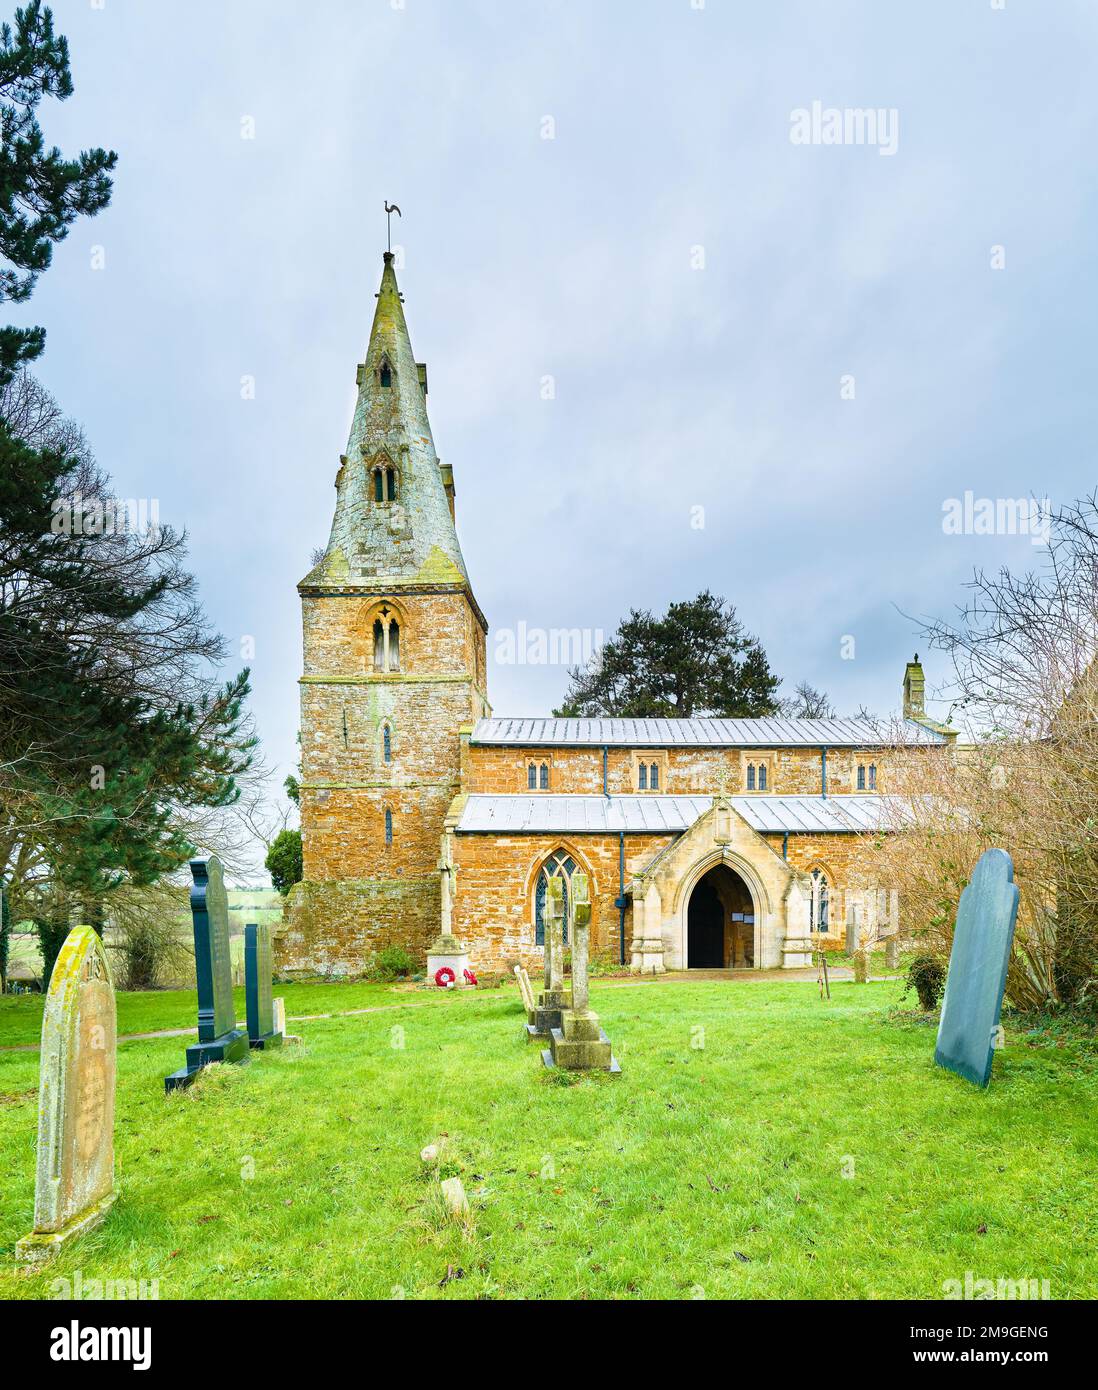 The churchyard at the medieval fourteenth century christian church in the village of Wilbarston, England. Stock Photo